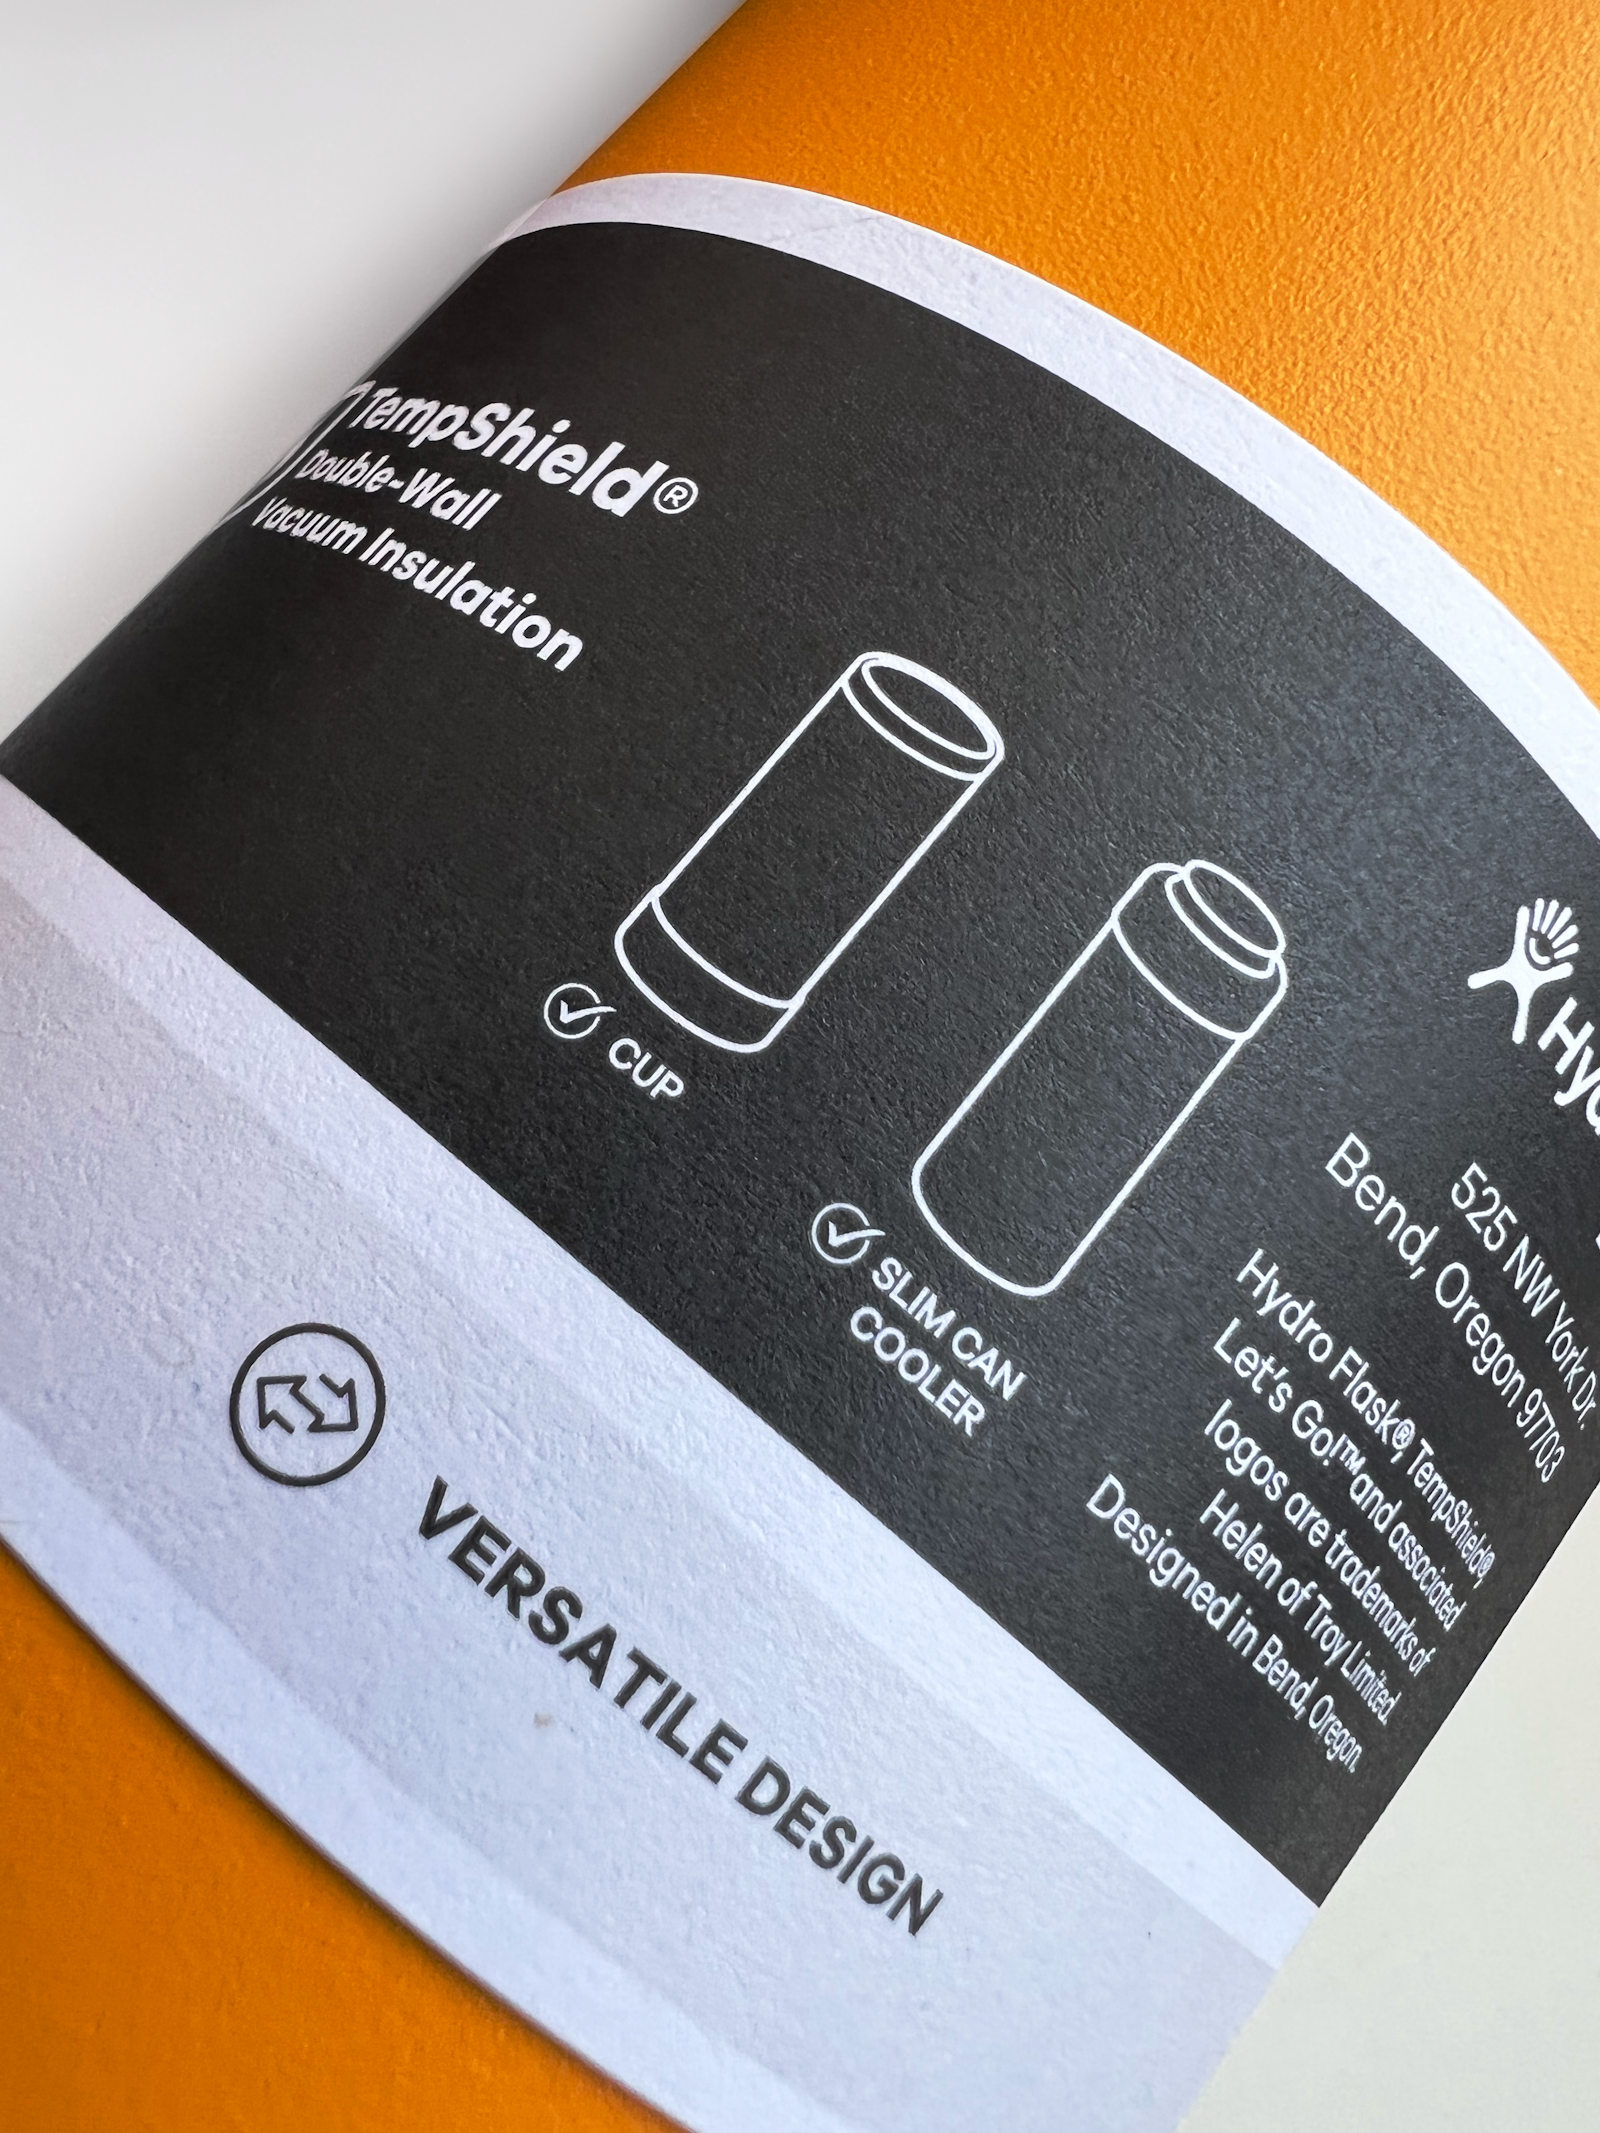 The Hydro Flask brand design packaging label on a orange flask in closeup photo.